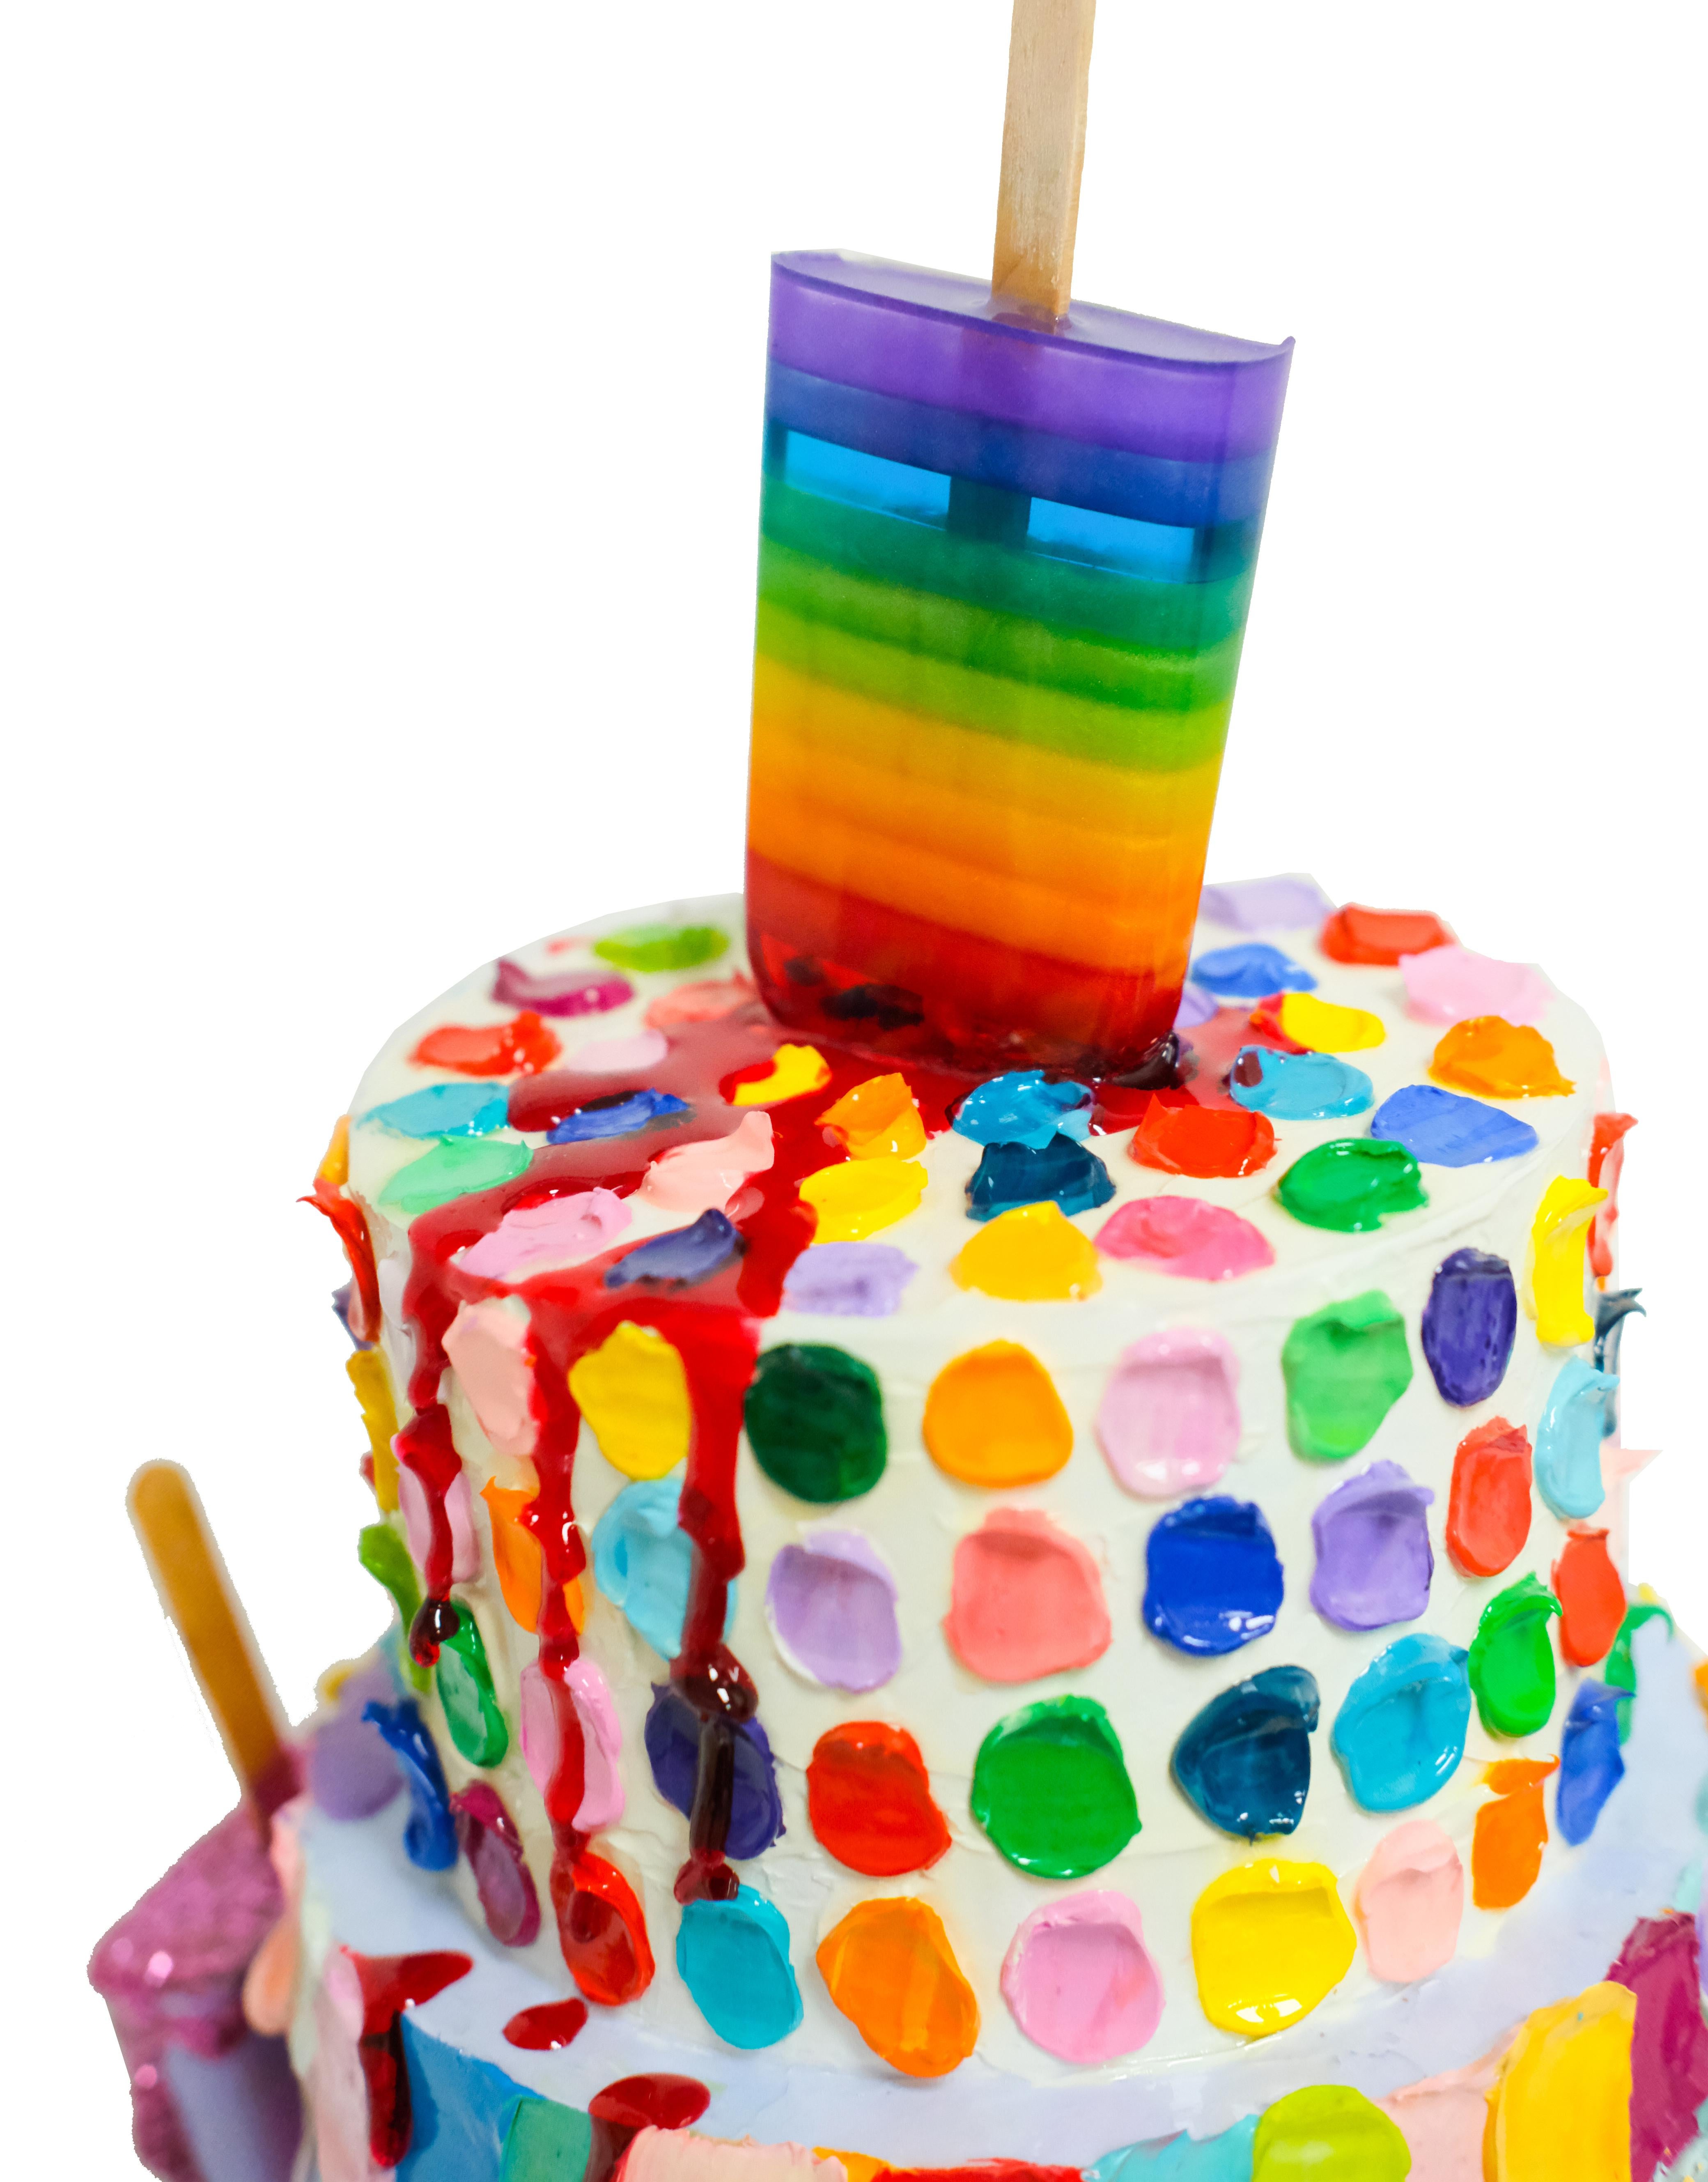 Over the Rainbow, Pop Art Sculpture
Original pop art style cake sculpture
17 x 88 x 11 x 15 inches
Oil Paint, Resin, Wood 
Original artwork signed by the artist

This collaborative cake sculpture was created by Betsy Enzensberger and Ann Marie